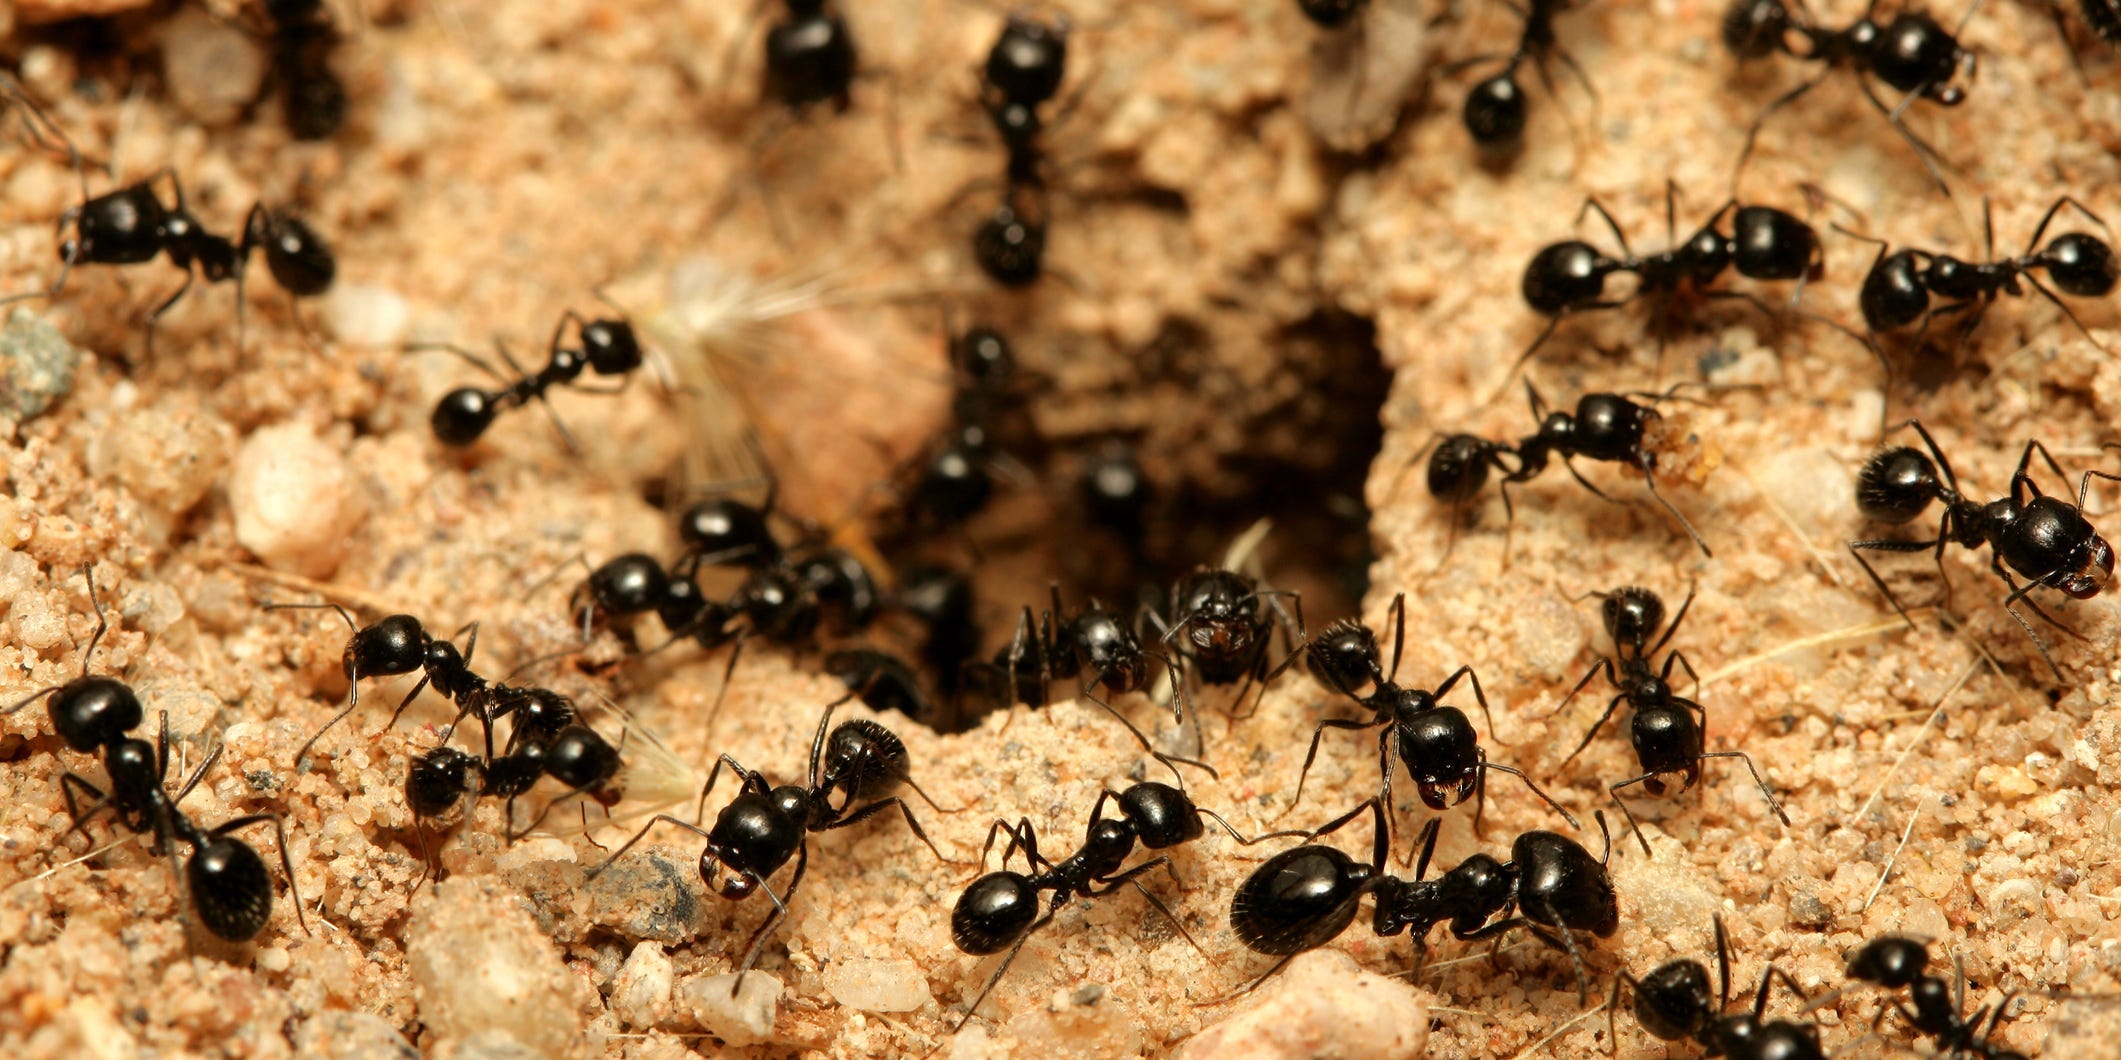 Ants entering an ant hill